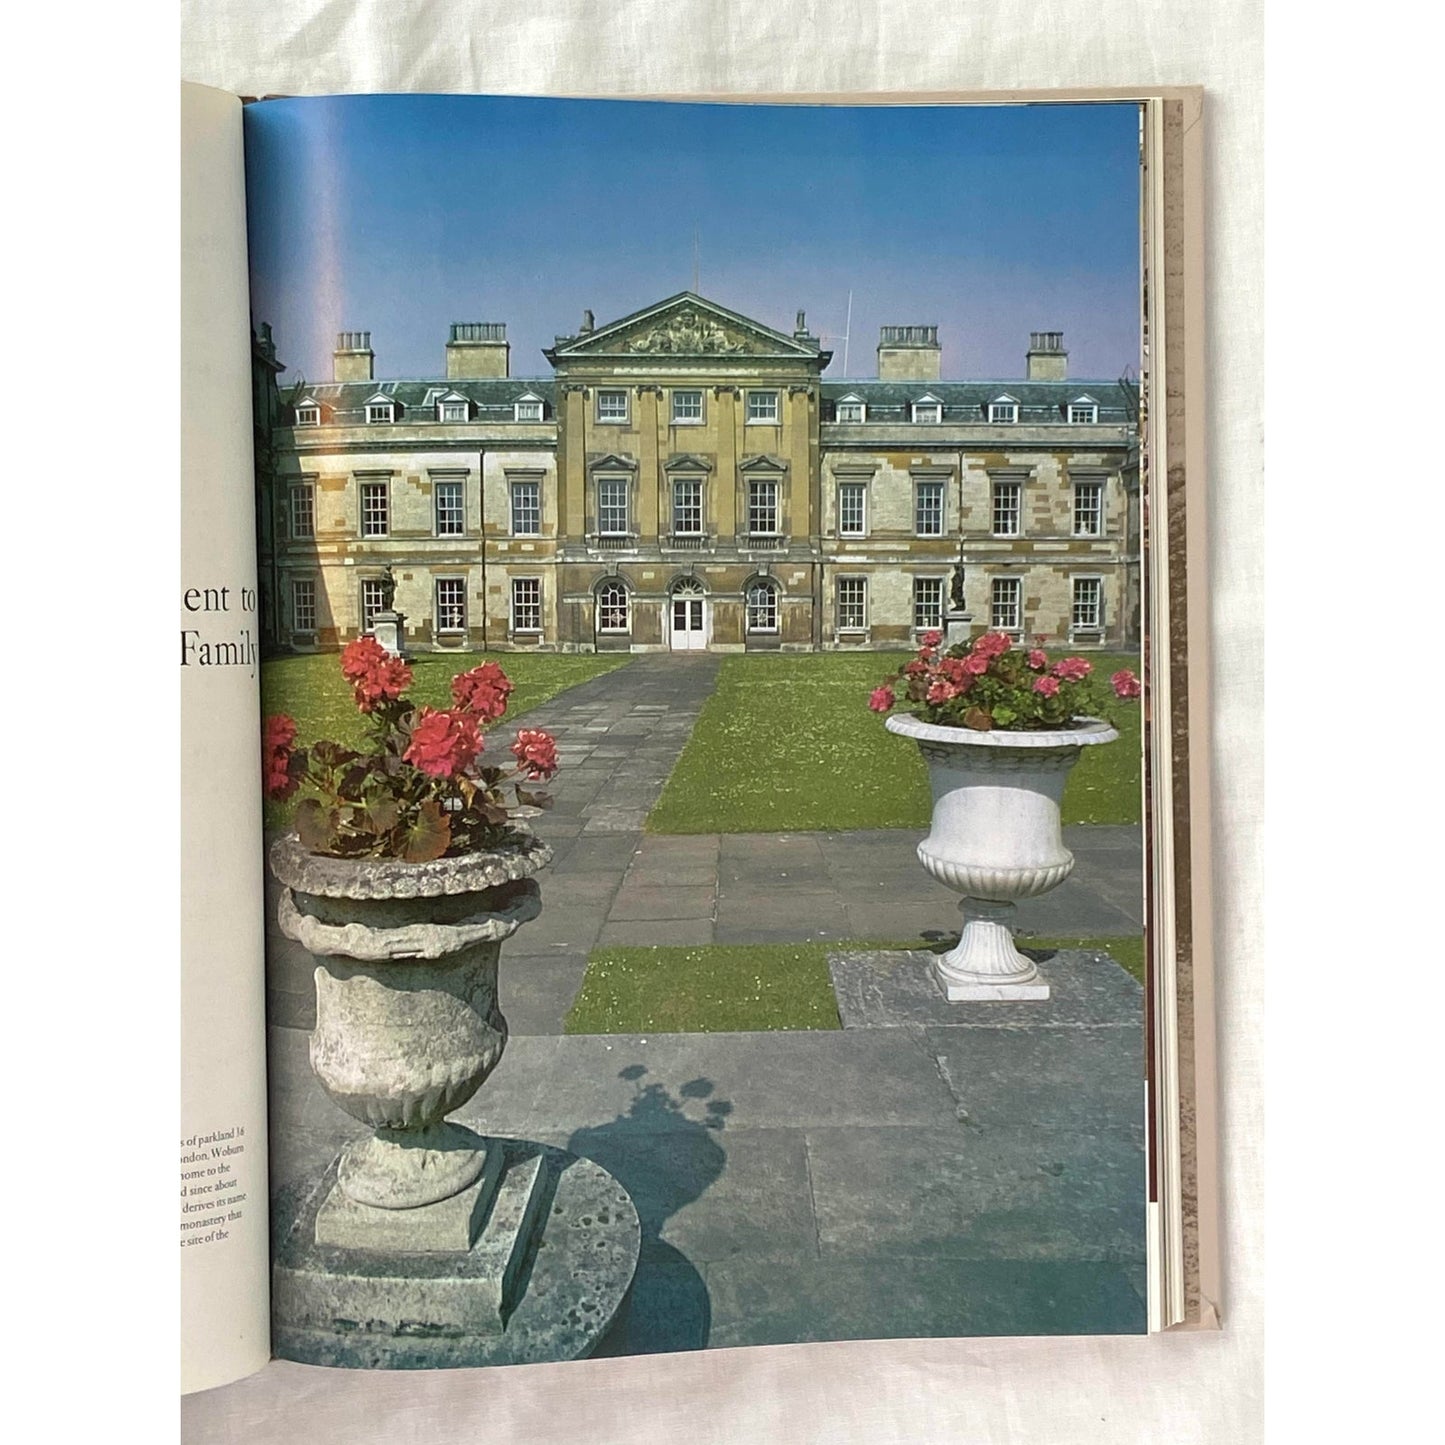 [ONLY 1 LEFT] Vintage “The World of Gainsborough” Art Book